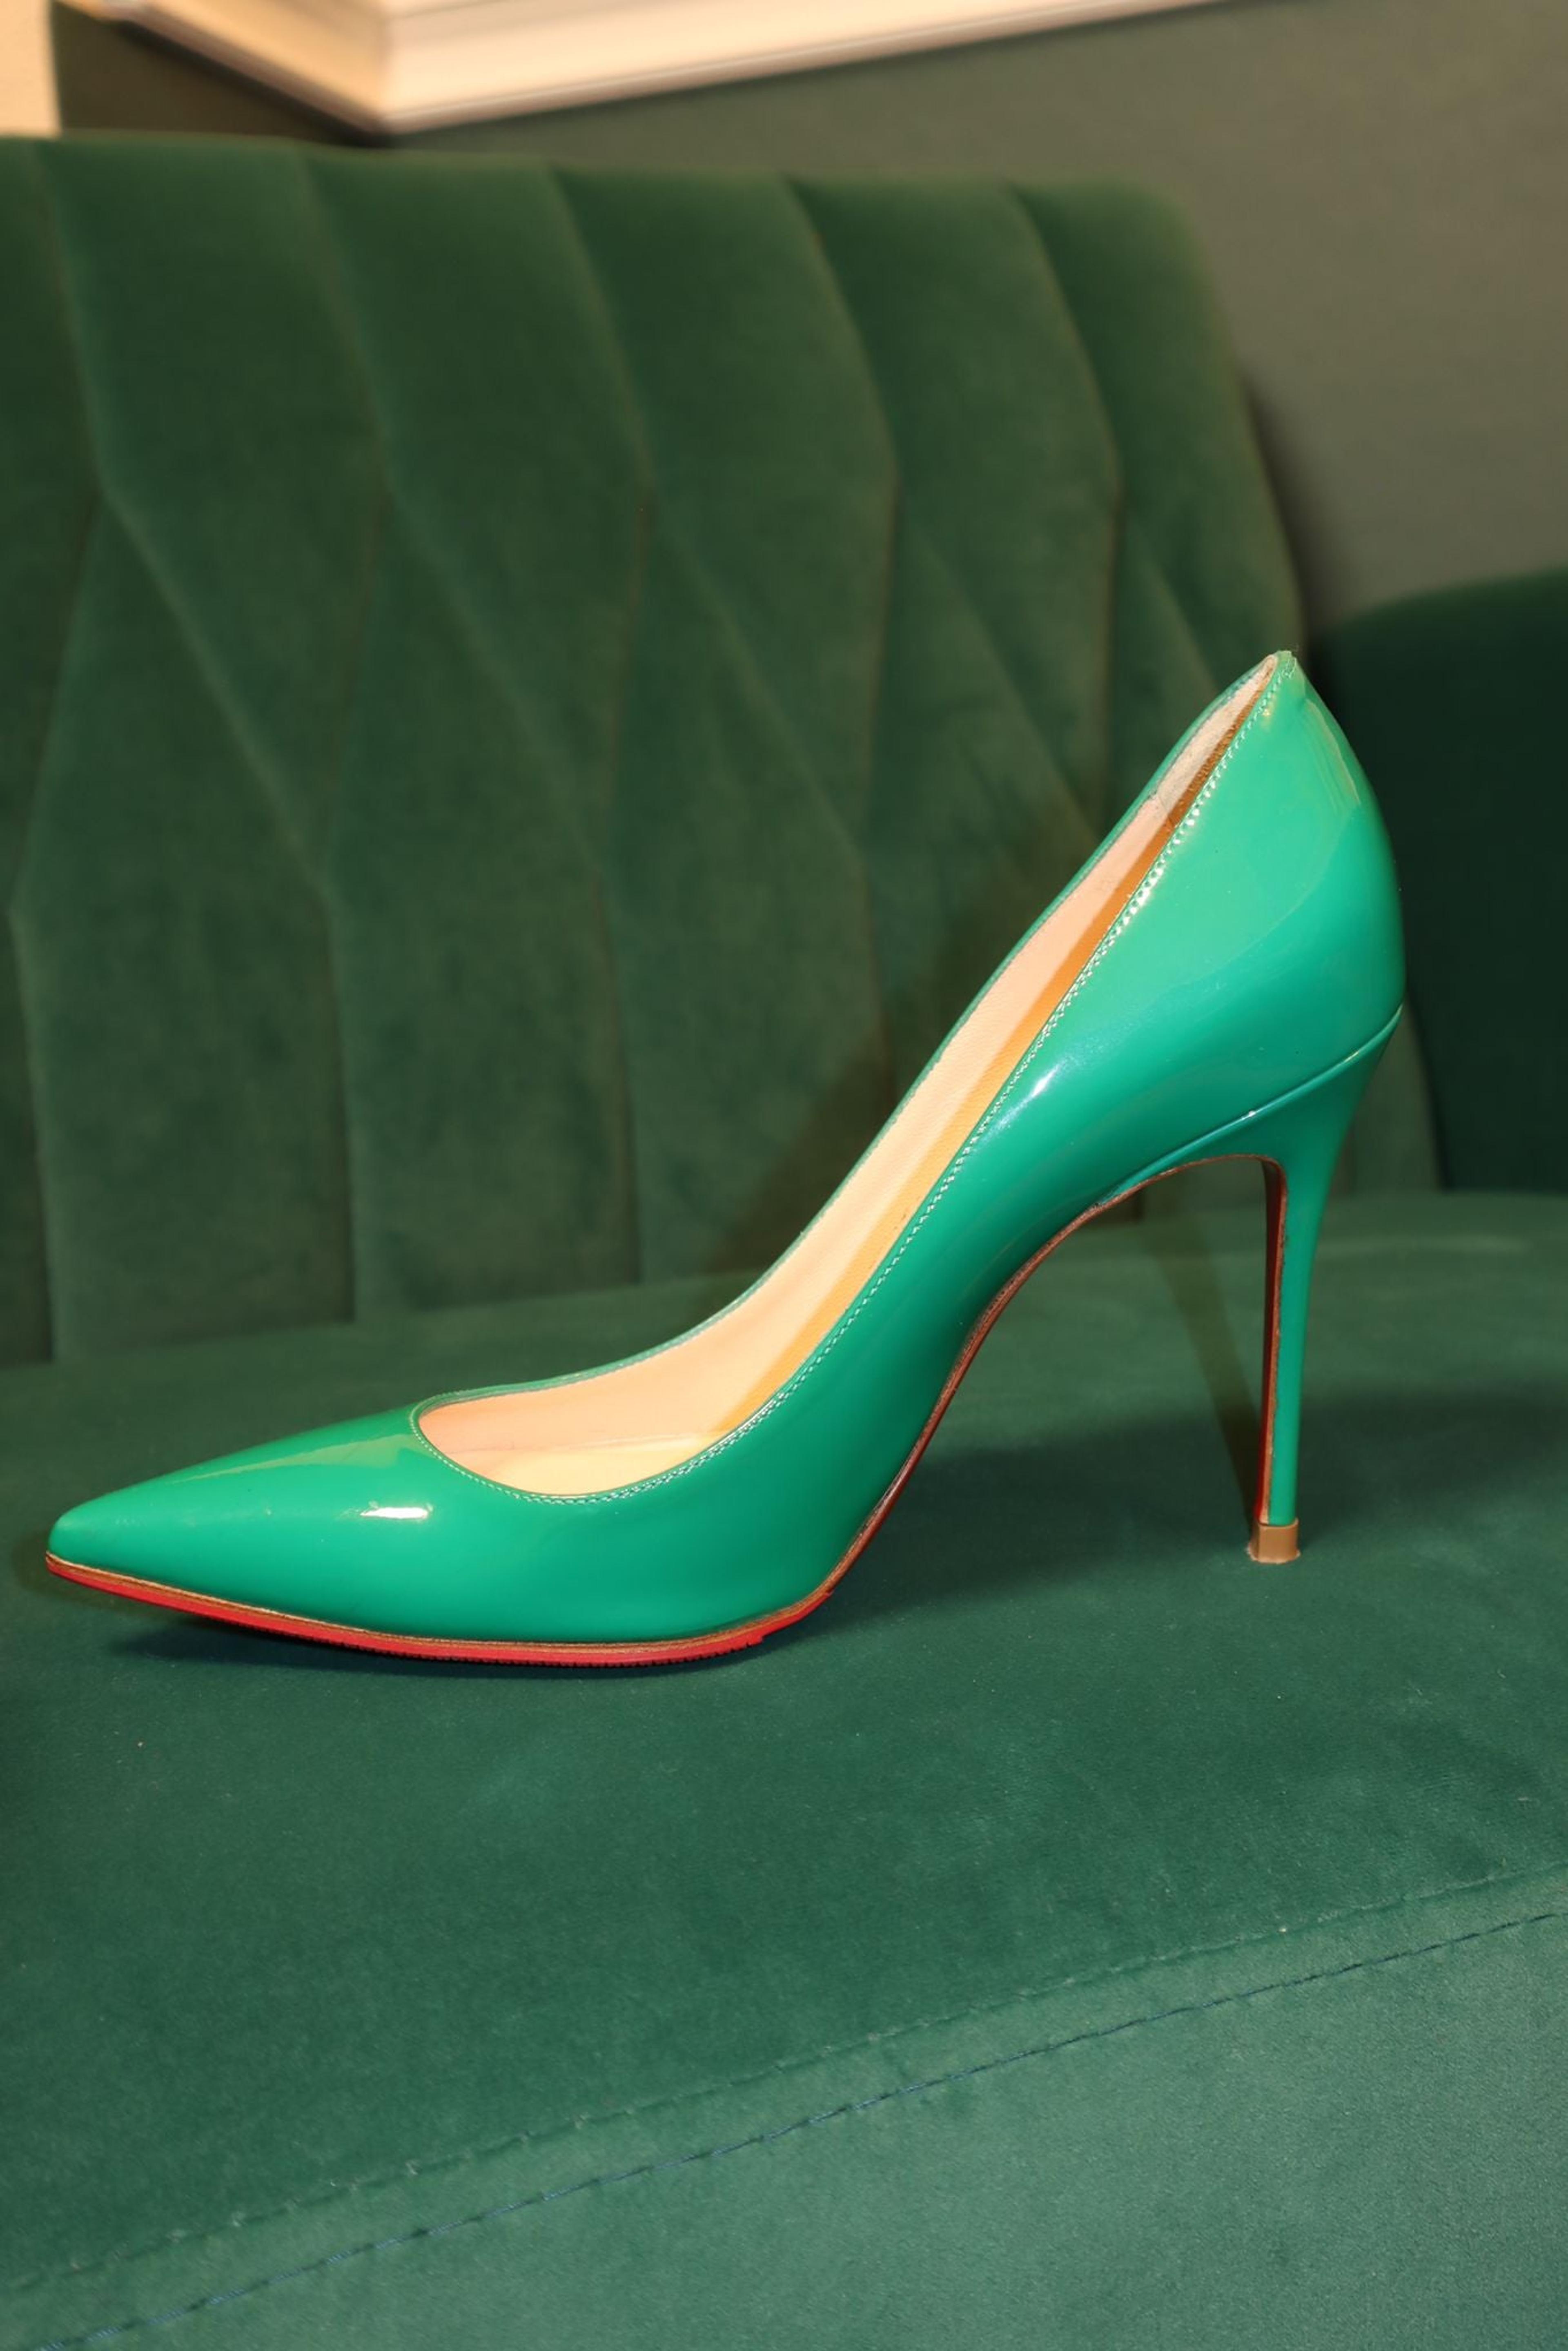 Alternate View 2 of Christian Louboutin Green Patent Leather Kate Pumps 35.5